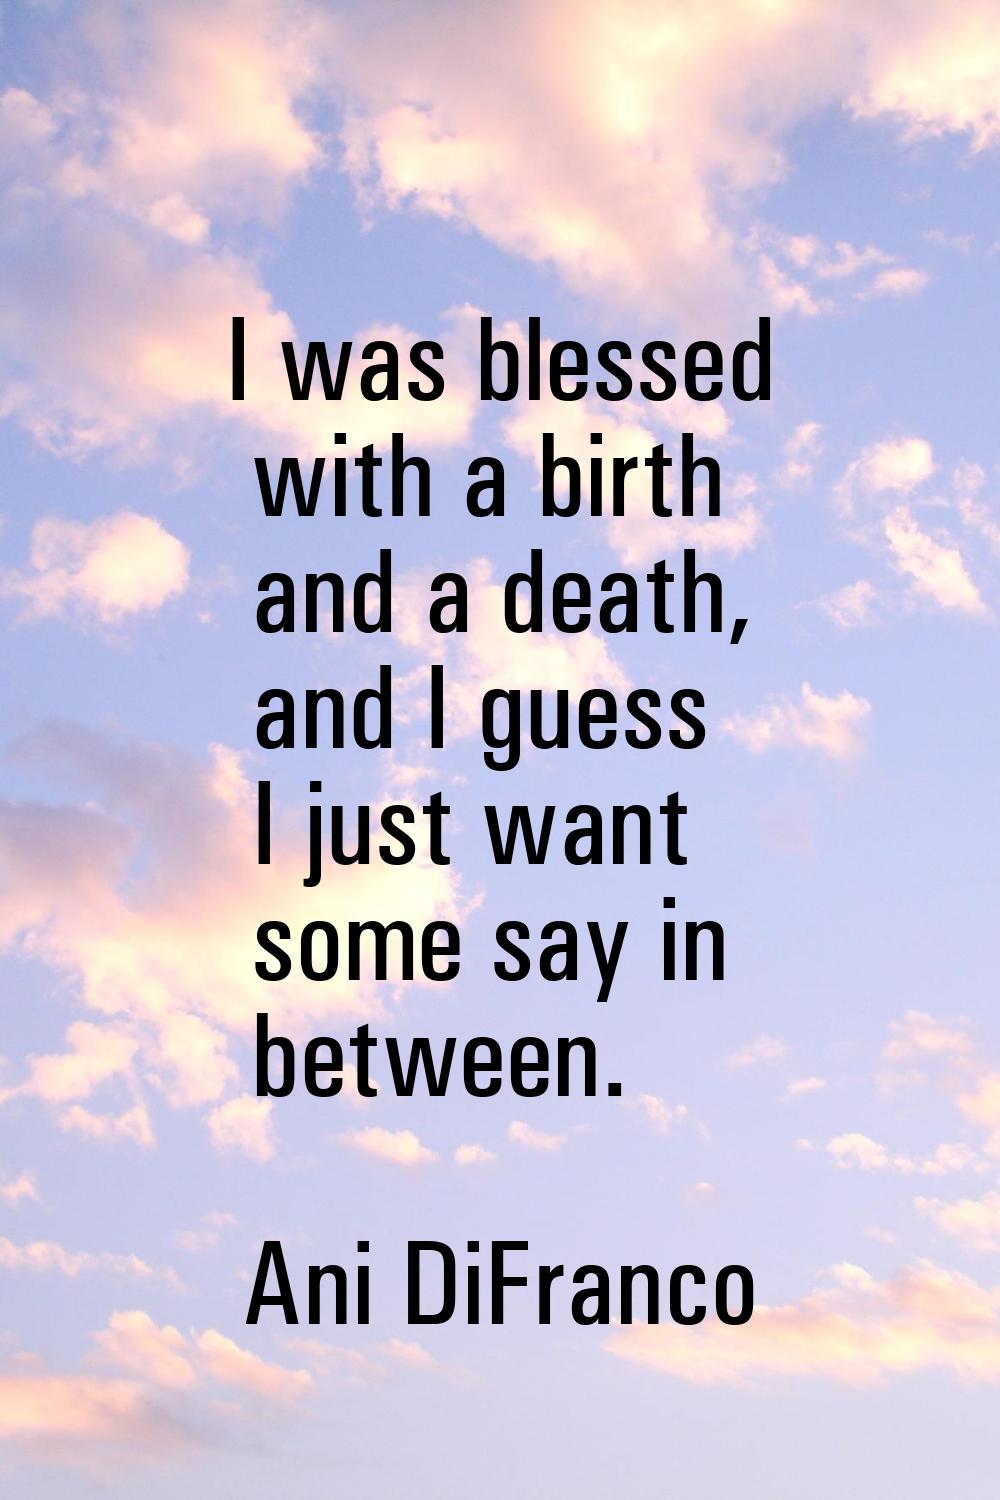 I was blessed with a birth and a death, and I guess I just want some say in between.